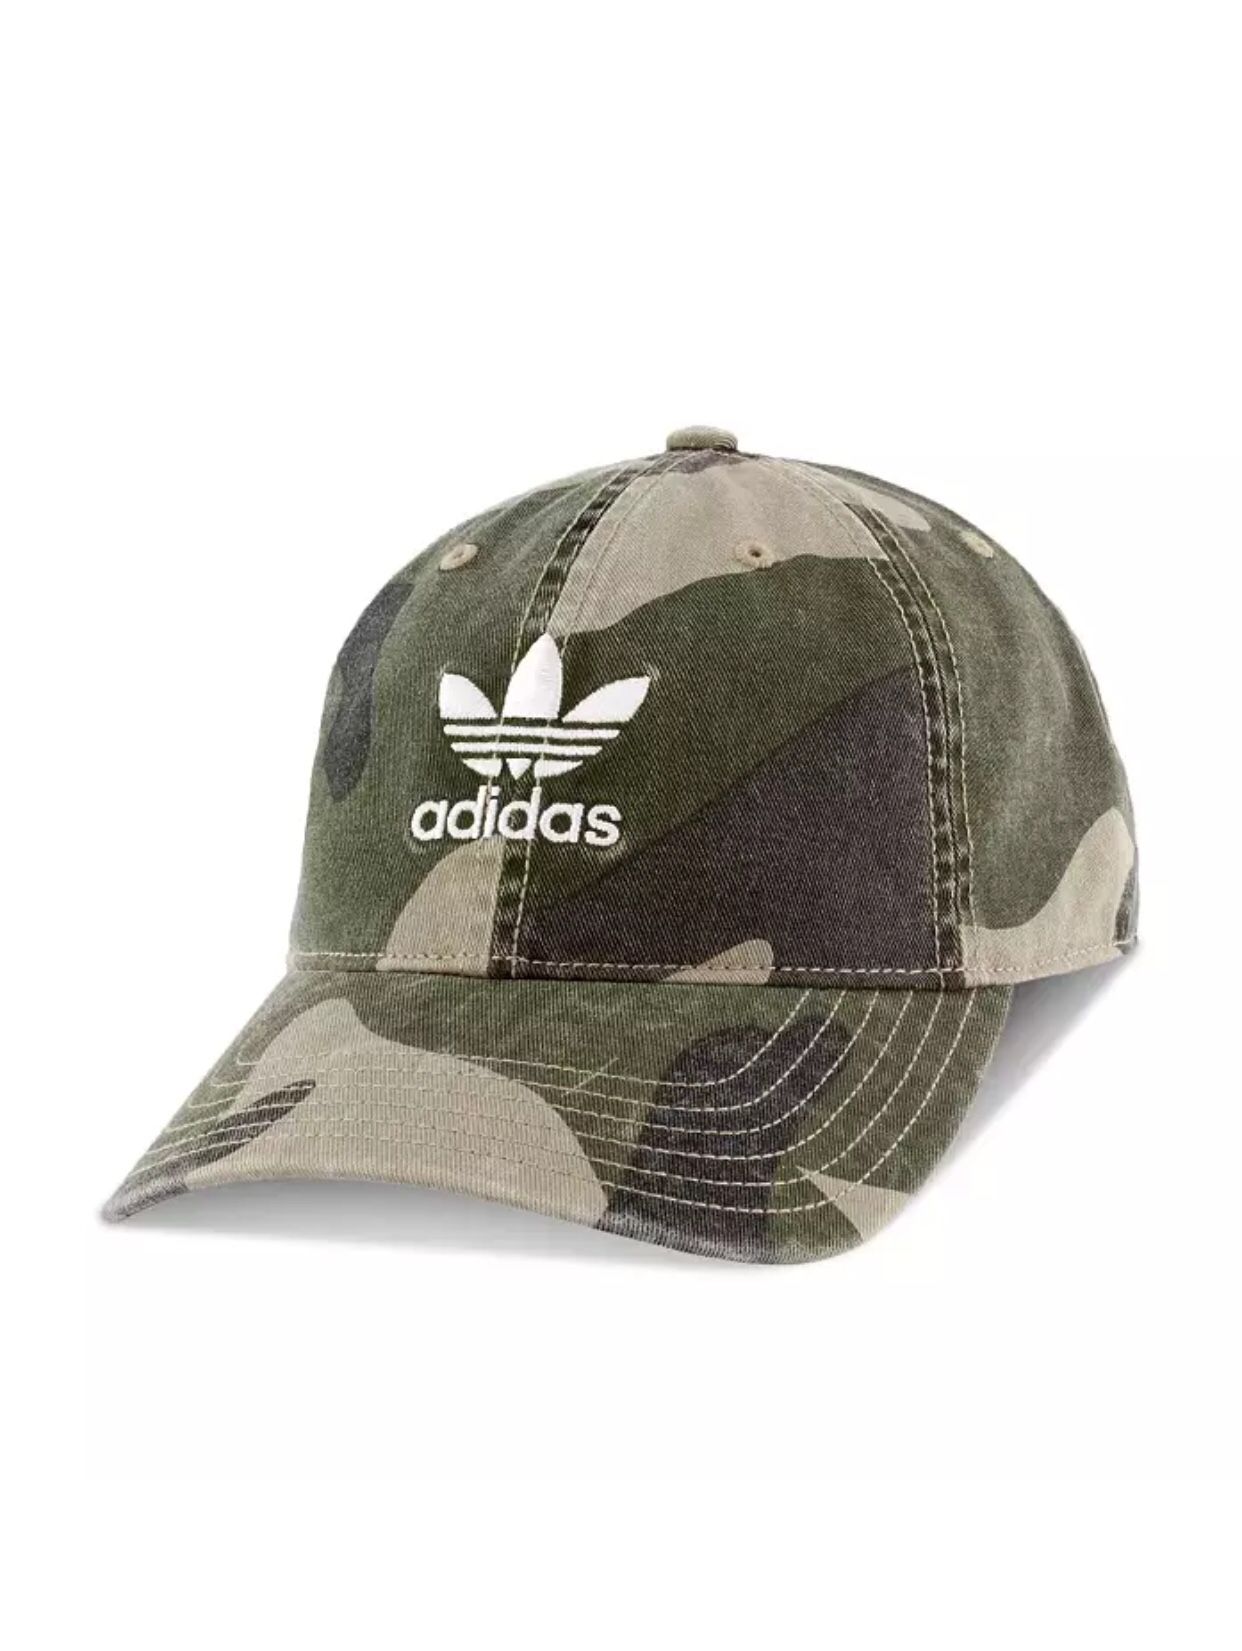 Adidas hat relaxed cap camp print adults unisex